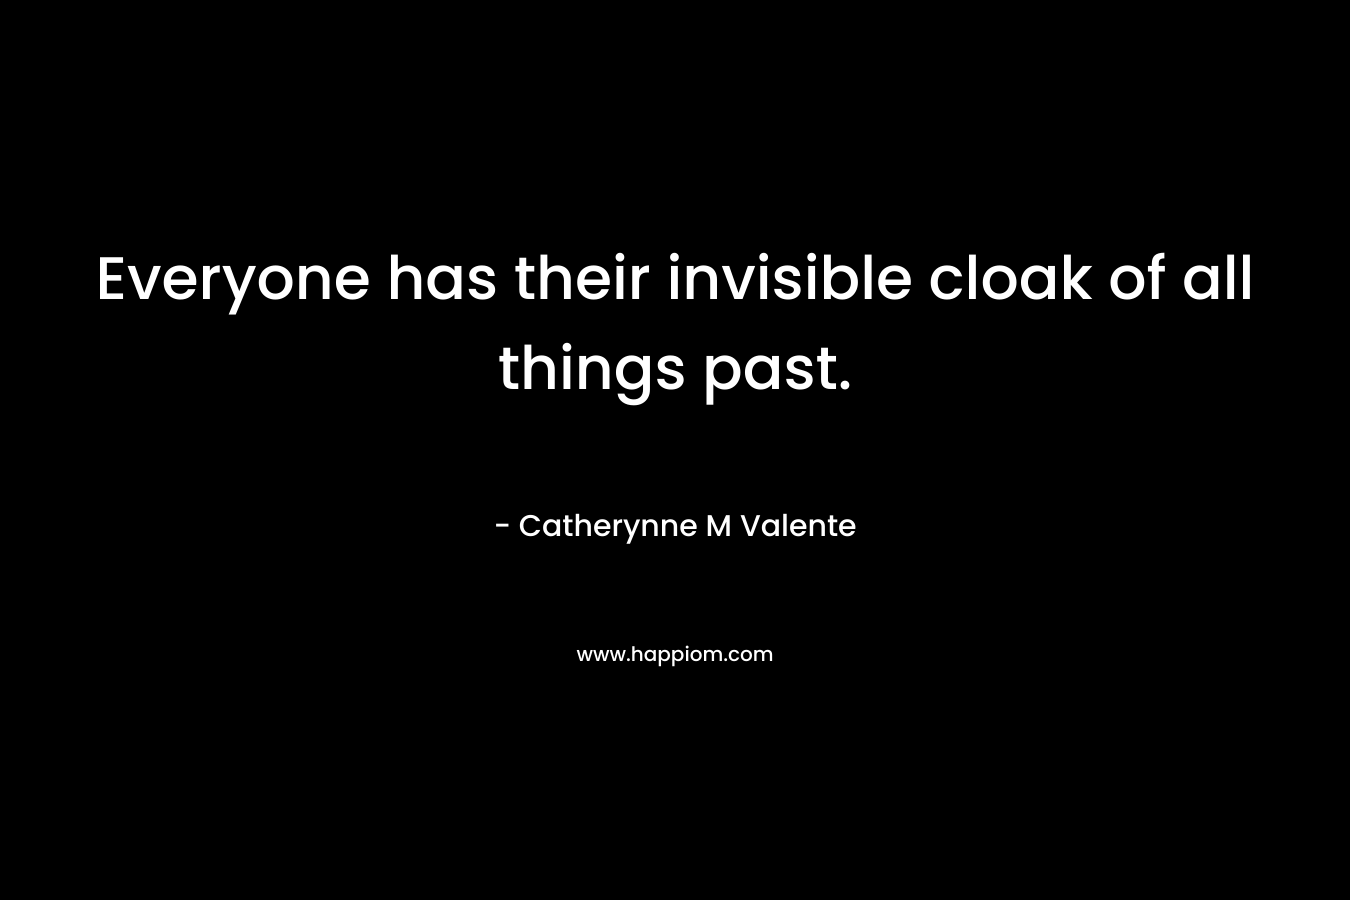 Everyone has their invisible cloak of all things past. – Catherynne M Valente